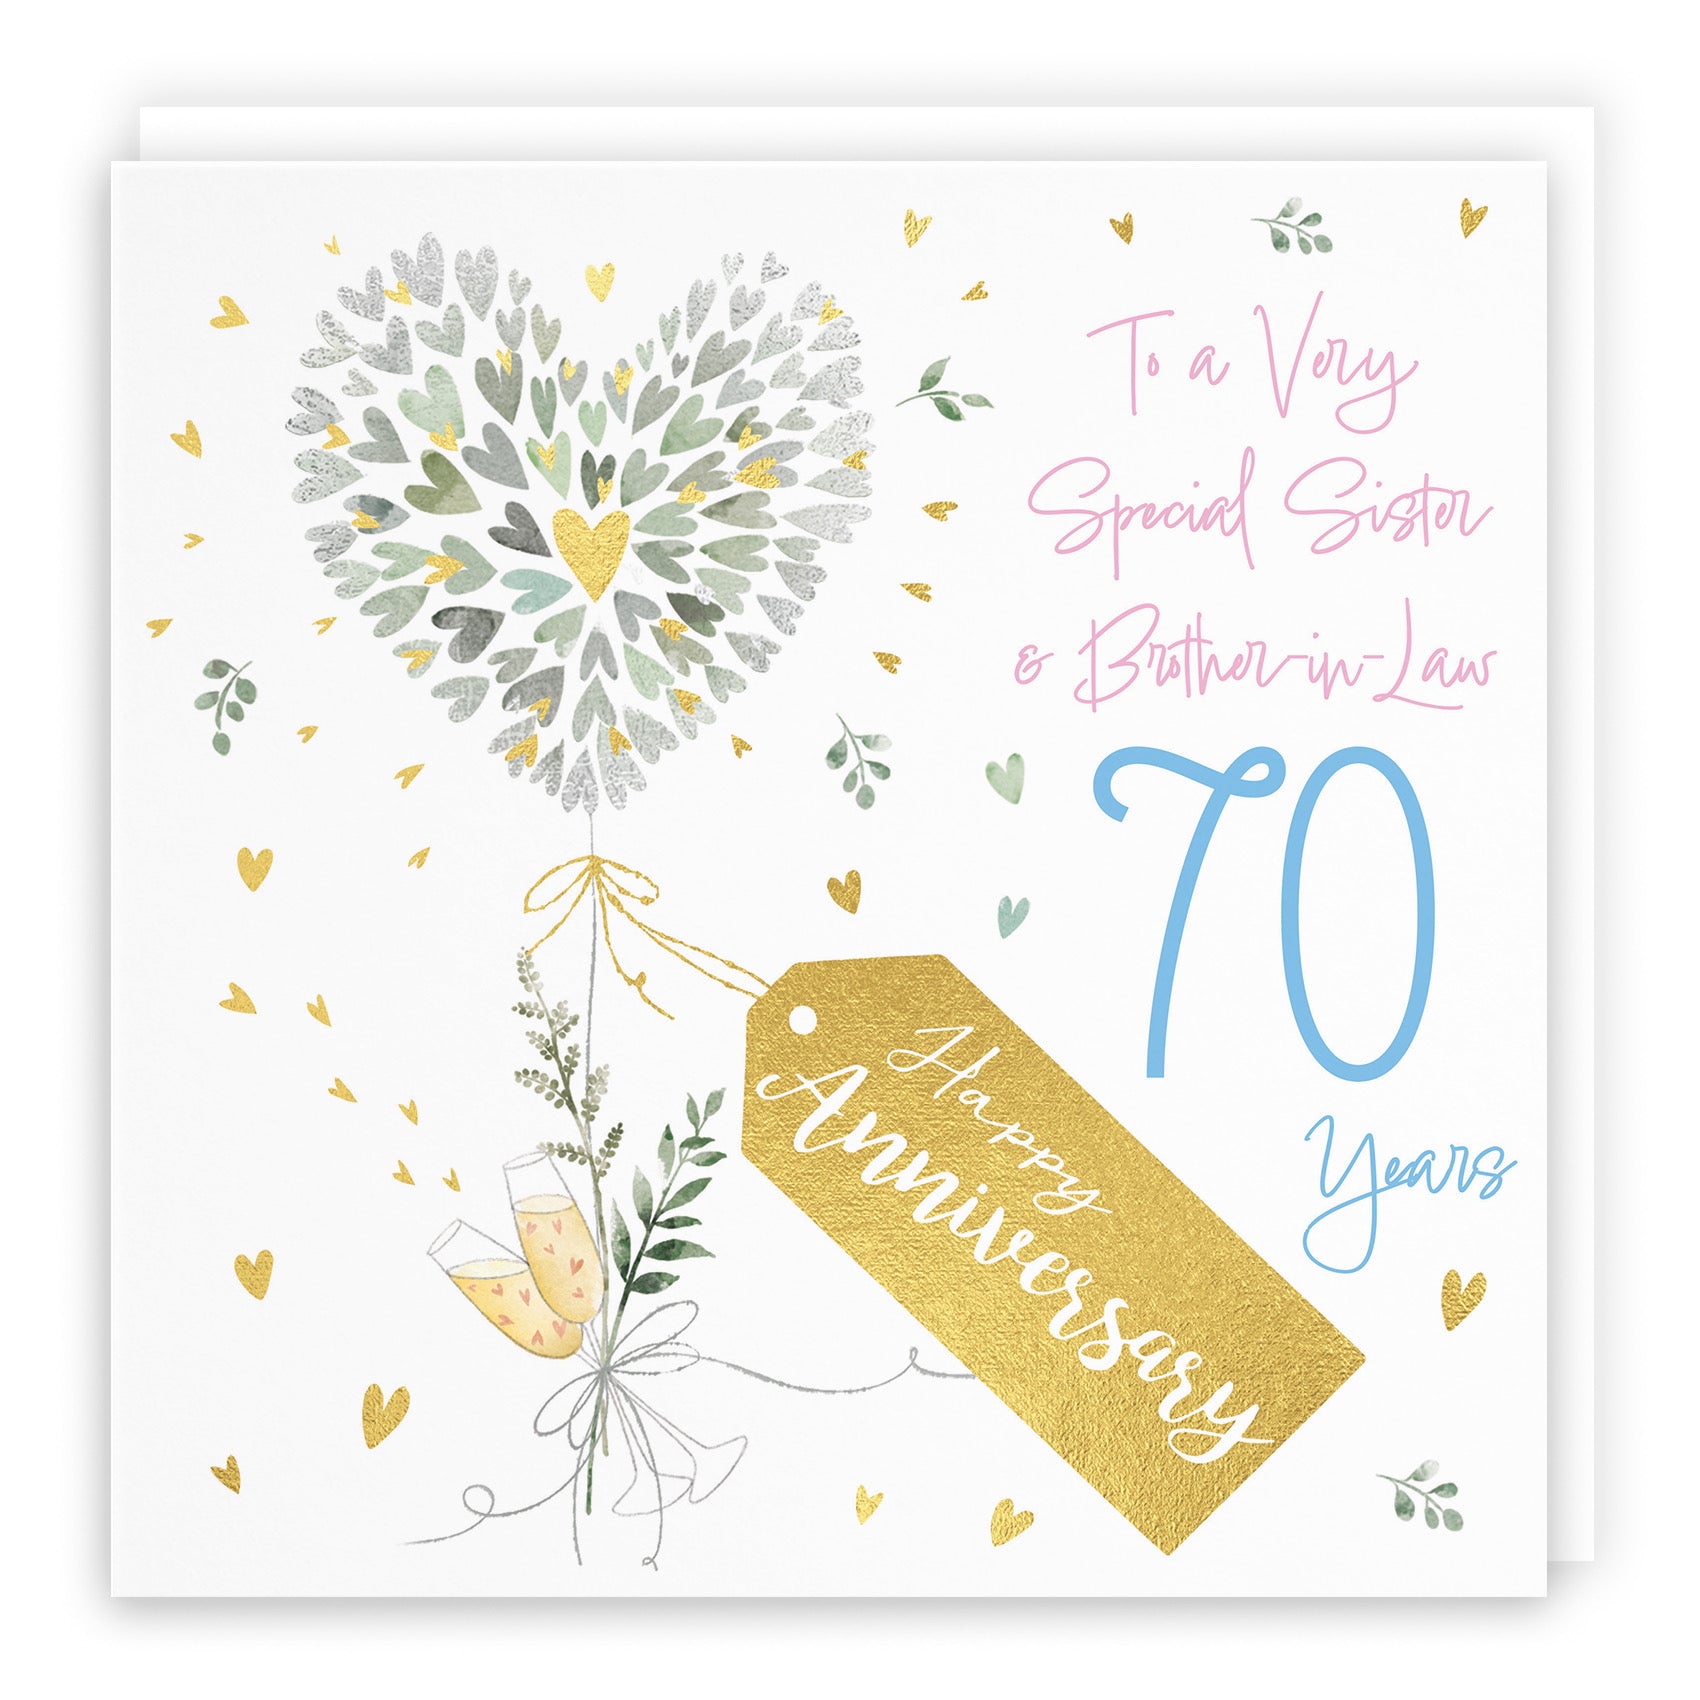 Sister And Brother-in-Law 70th Anniversary Card Contemporary Hearts Milo's Gallery - Default Title (B0CKJ5ZWZJ)